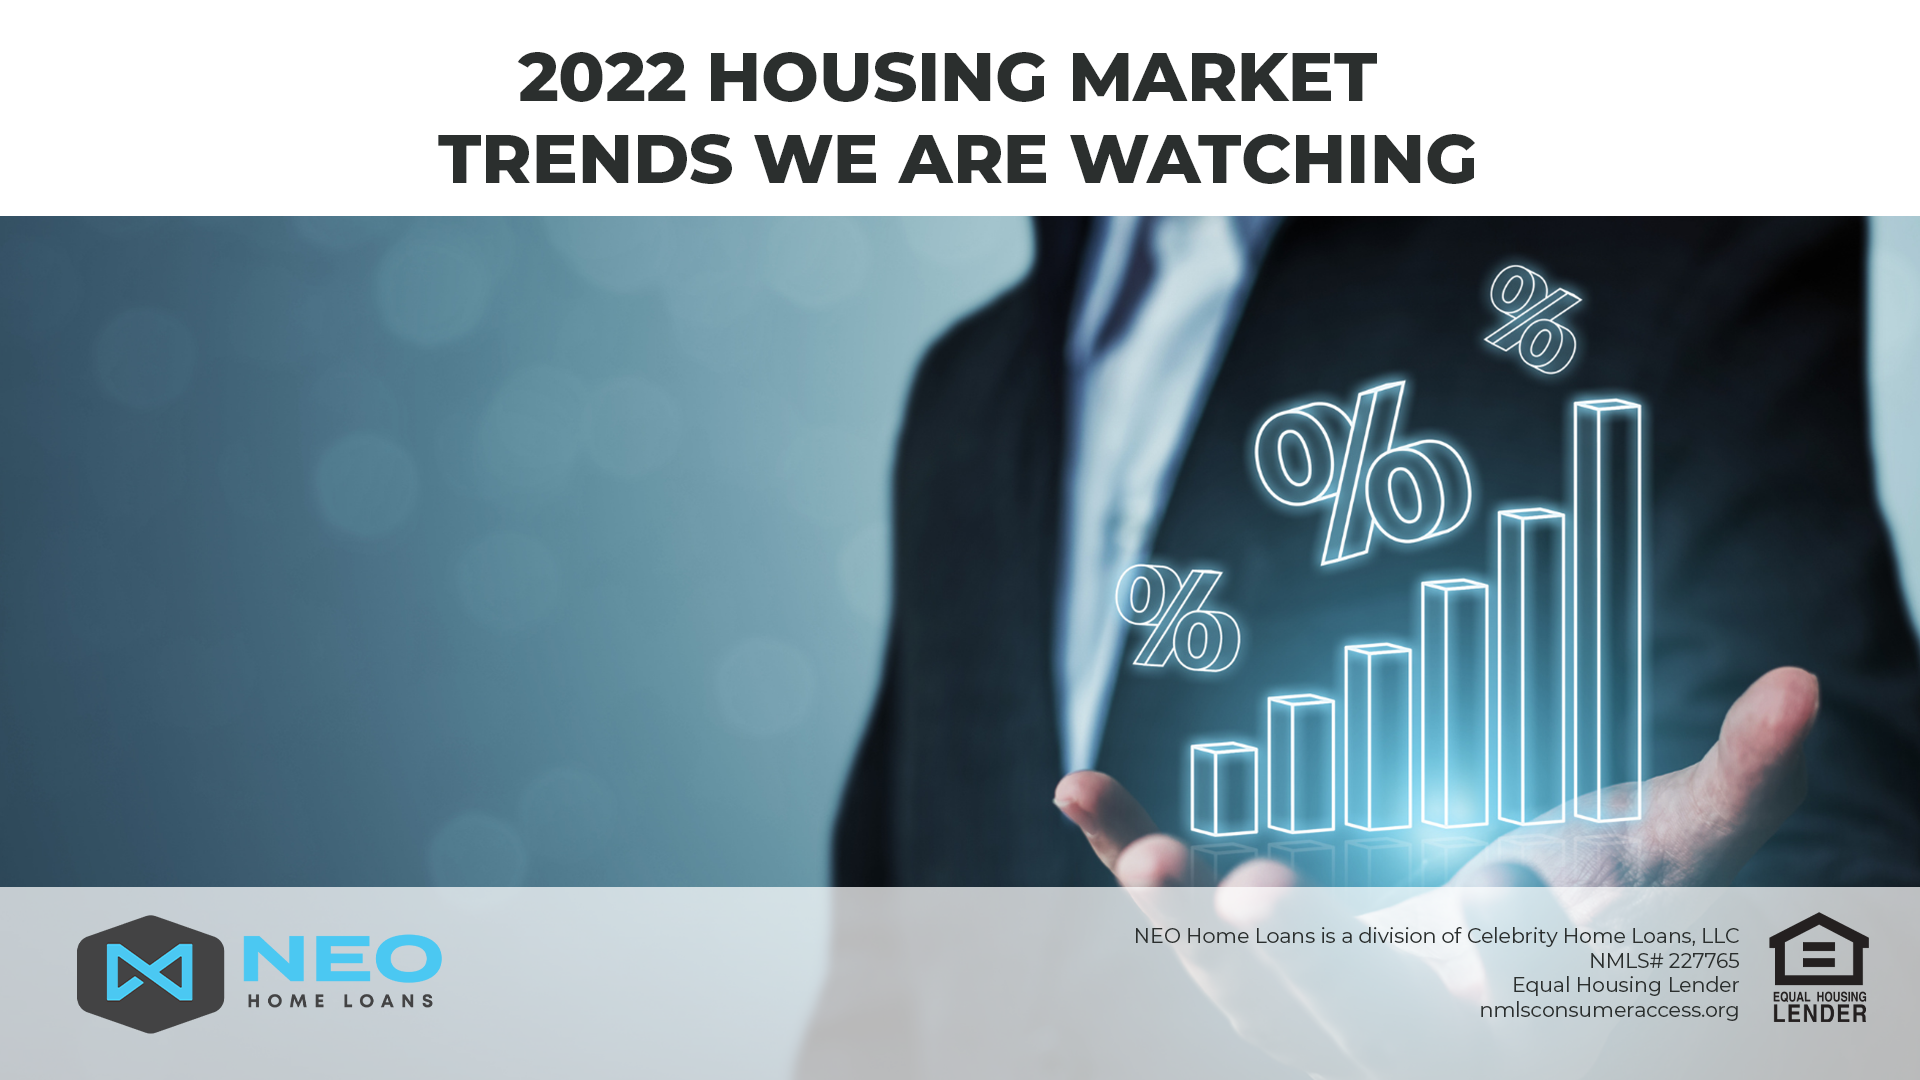 2022 Housing Market Trends We Are Watching